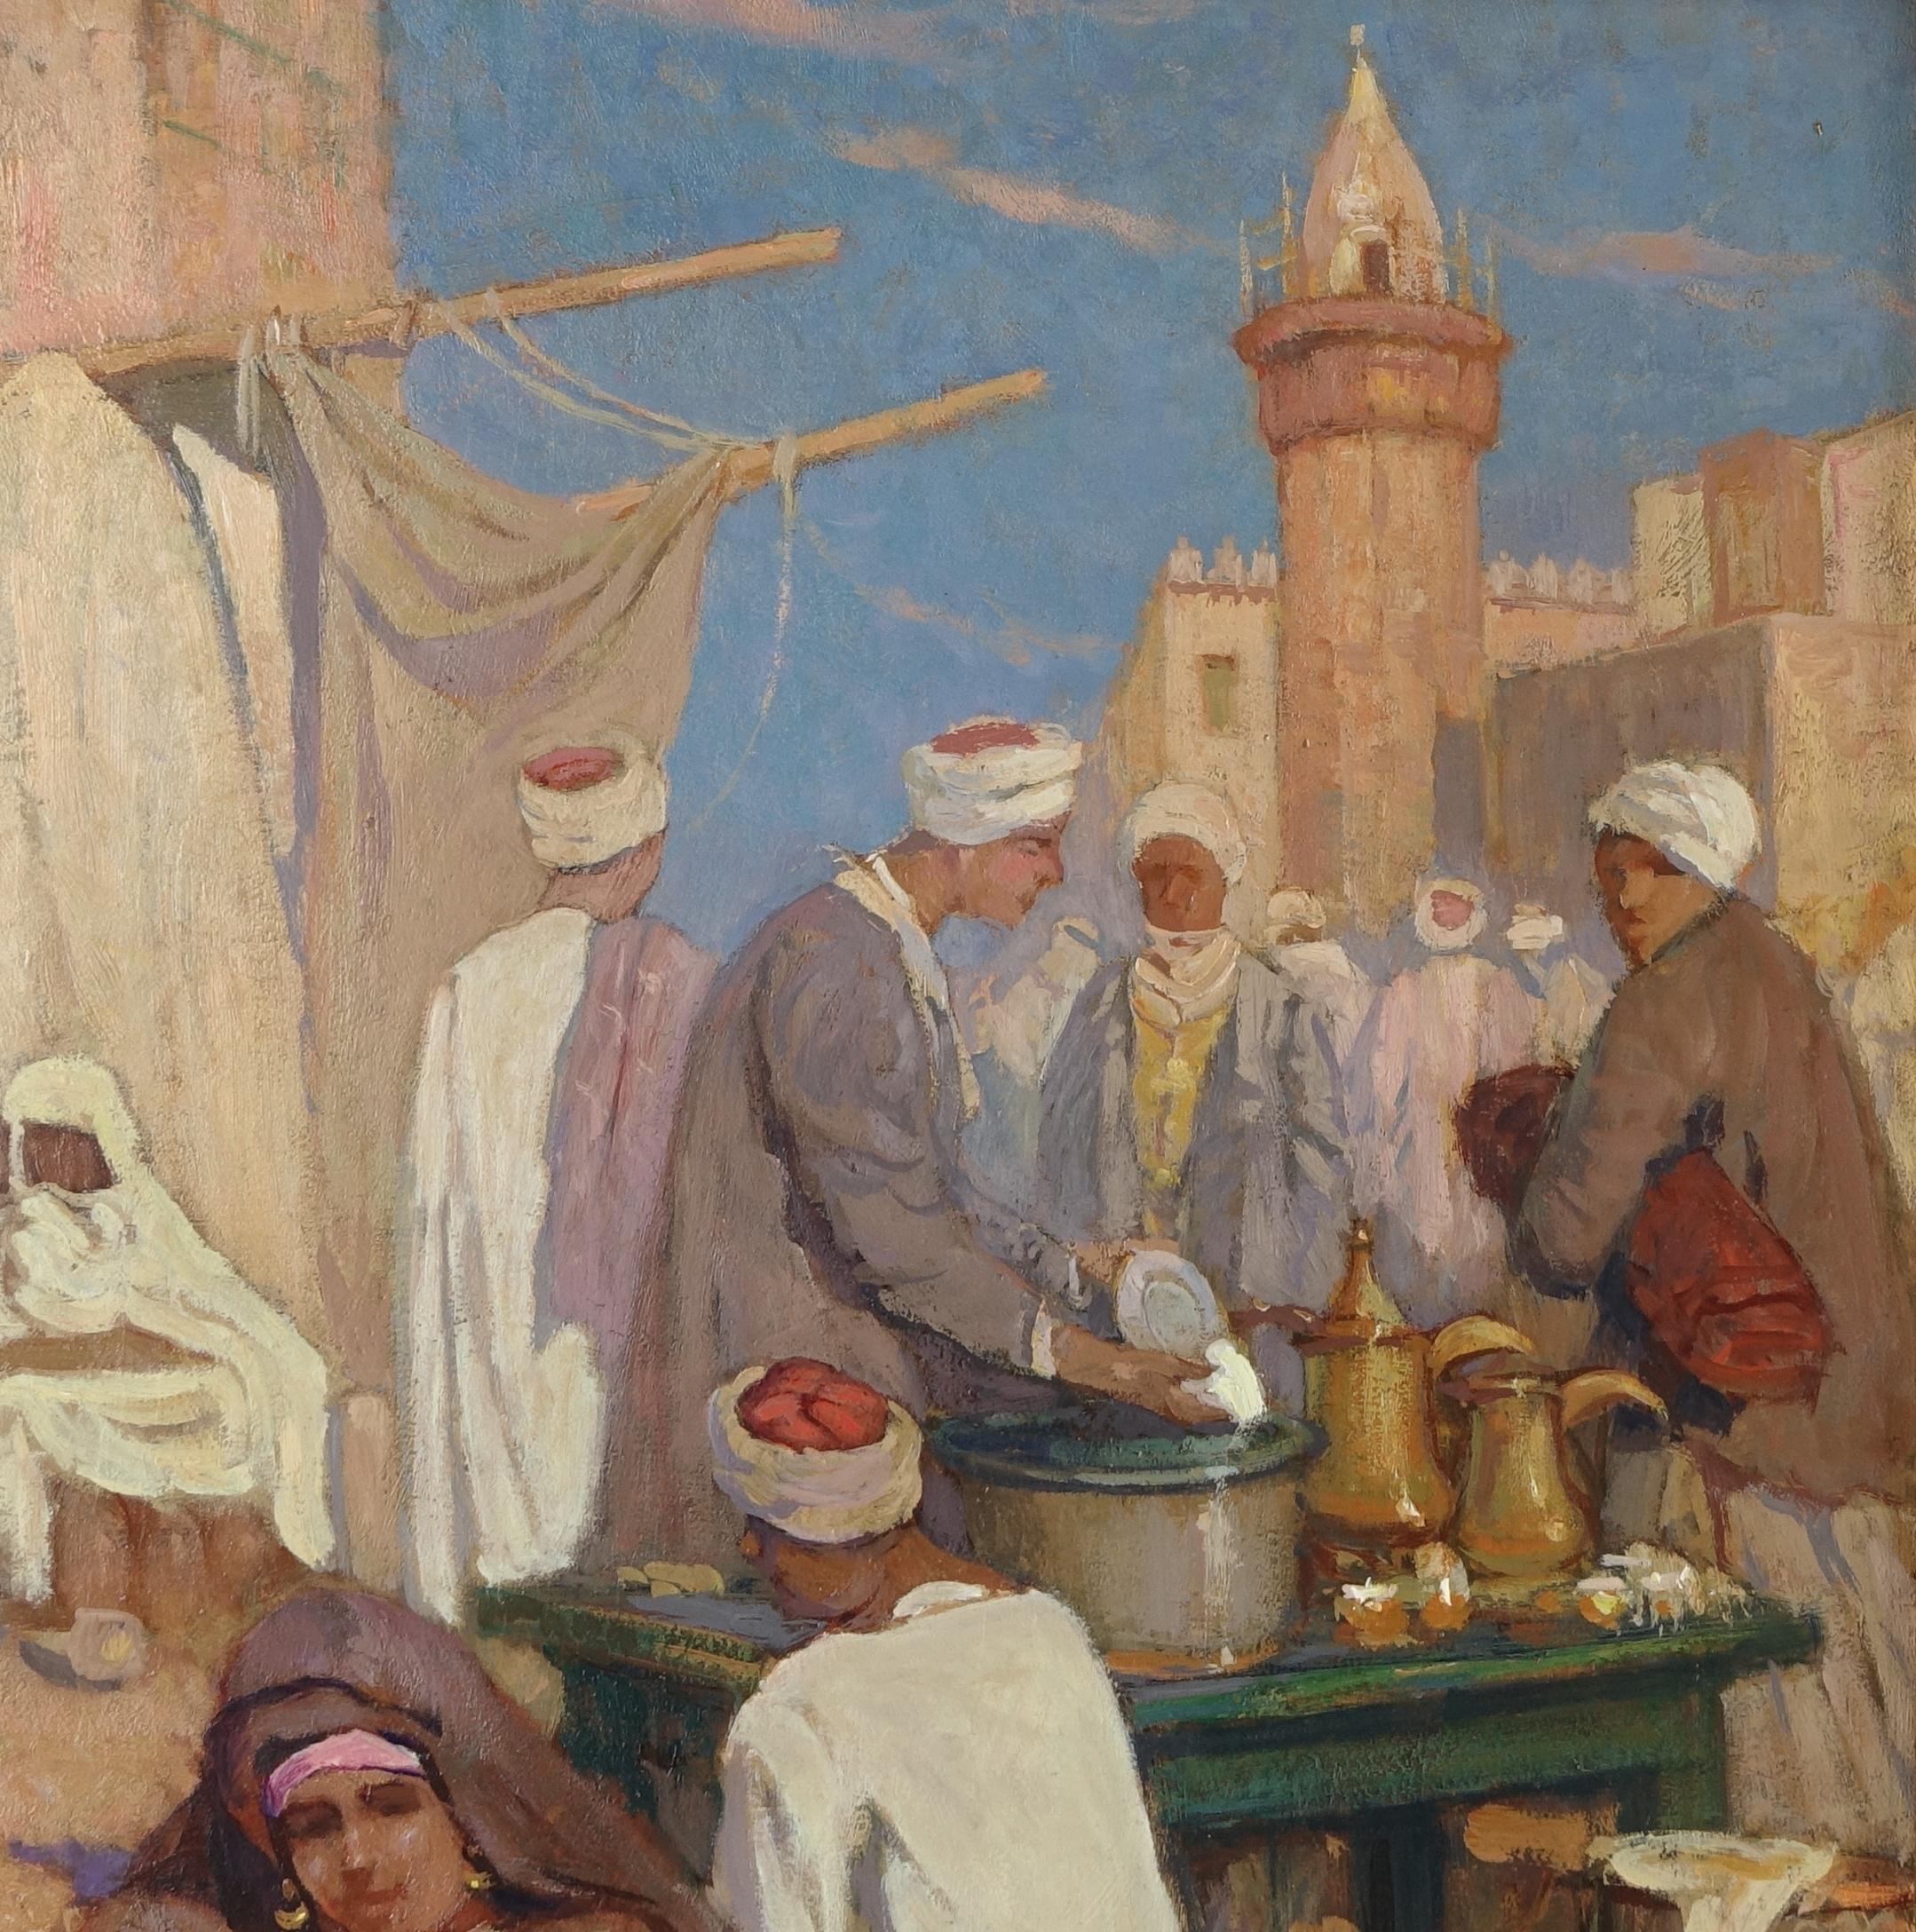 Orientalist Painting Signet and Dated Moretti Foggia 1910, Cairo 3